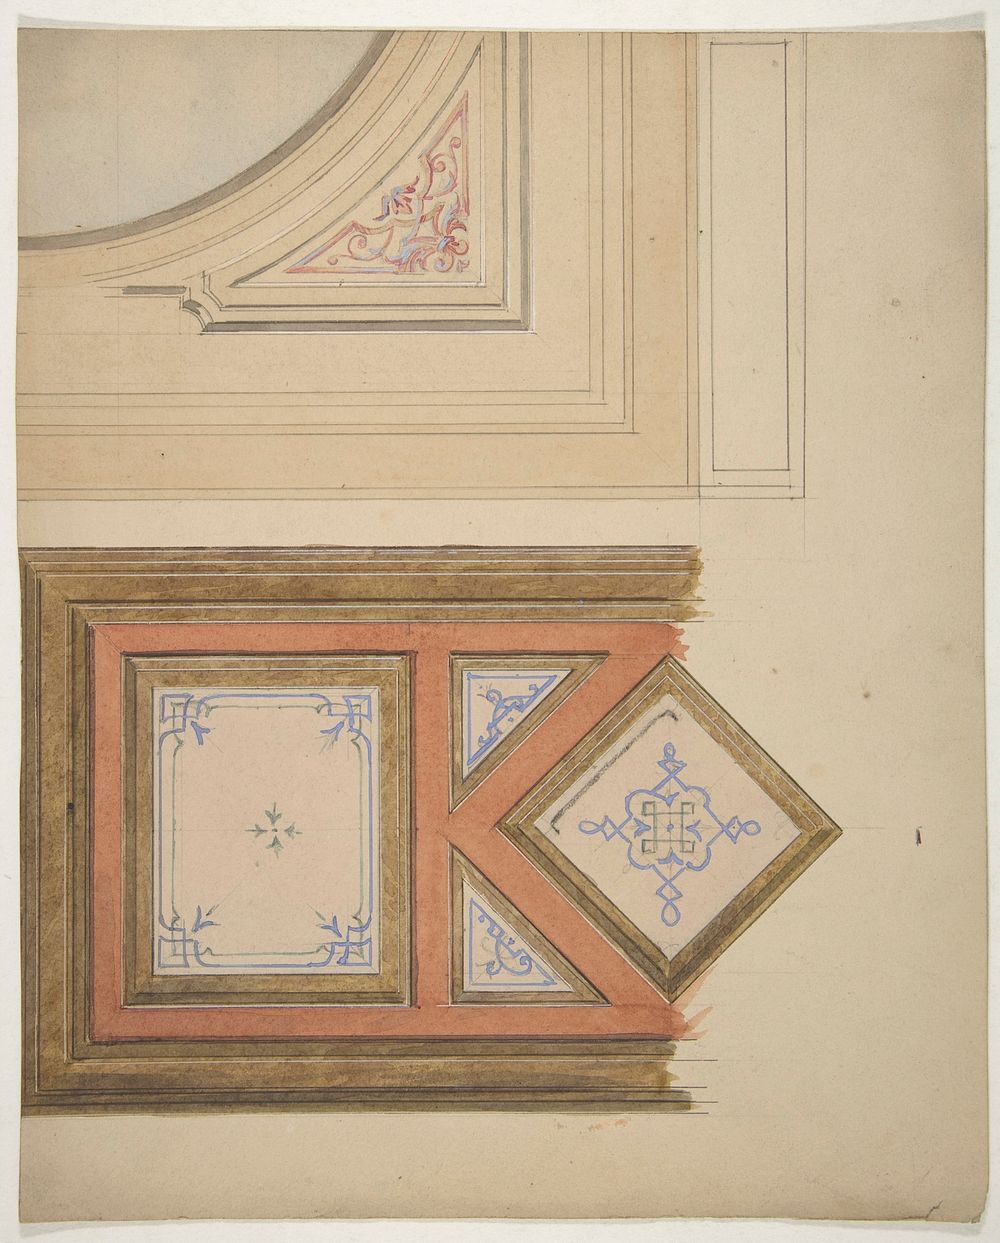 Designs for a ceiling and painted panel by Jules Edmond Charles Lachaise and Eugène Pierre Gourdet